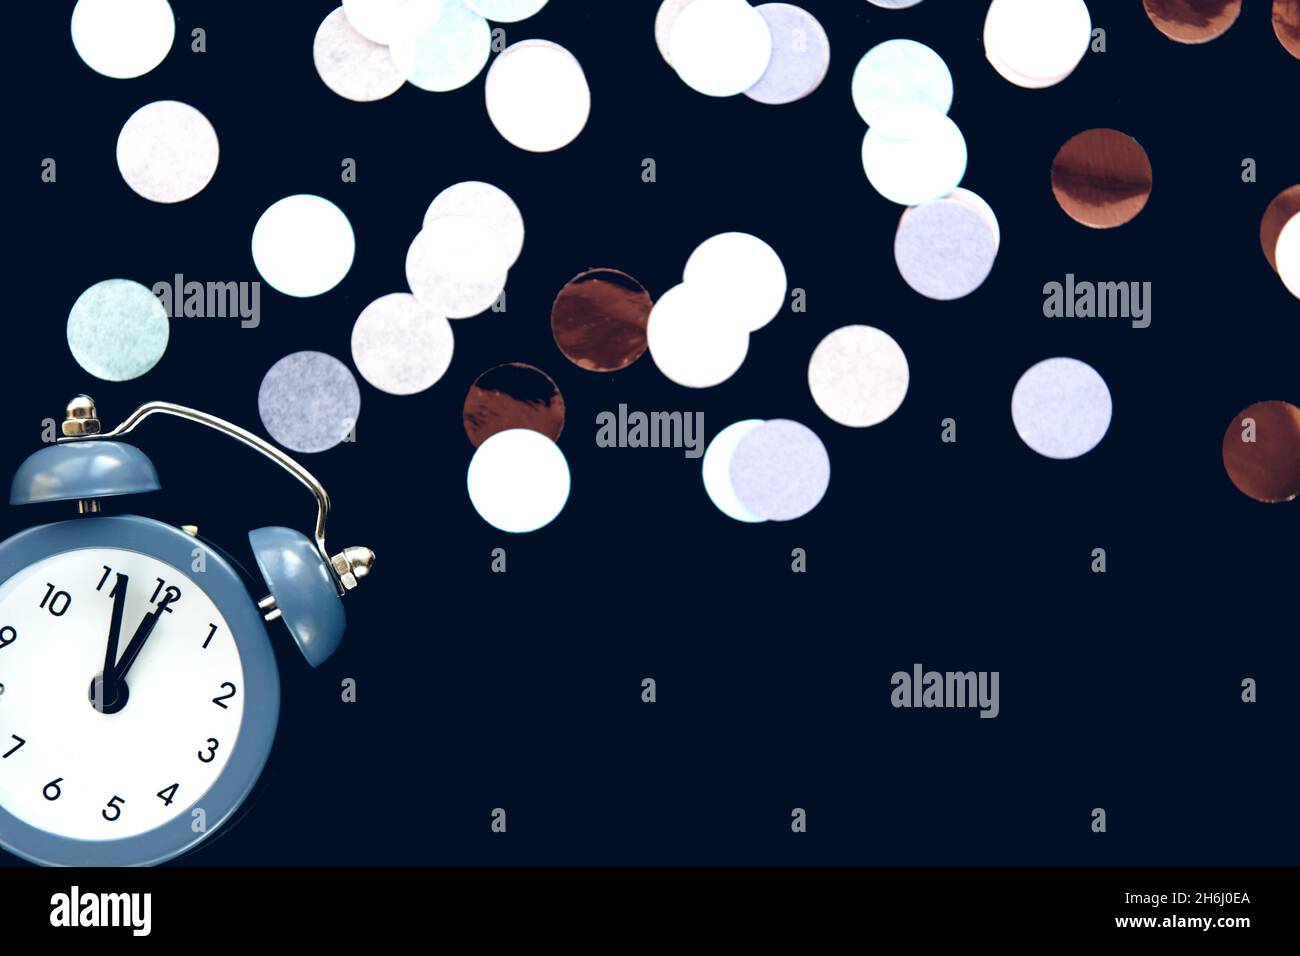 Blue vintage alarm clock shows 12 o'clock isolated on dark background with sparkling round confetti metafan. Wake up and hurry up. Countdown to midnig Stock Photo